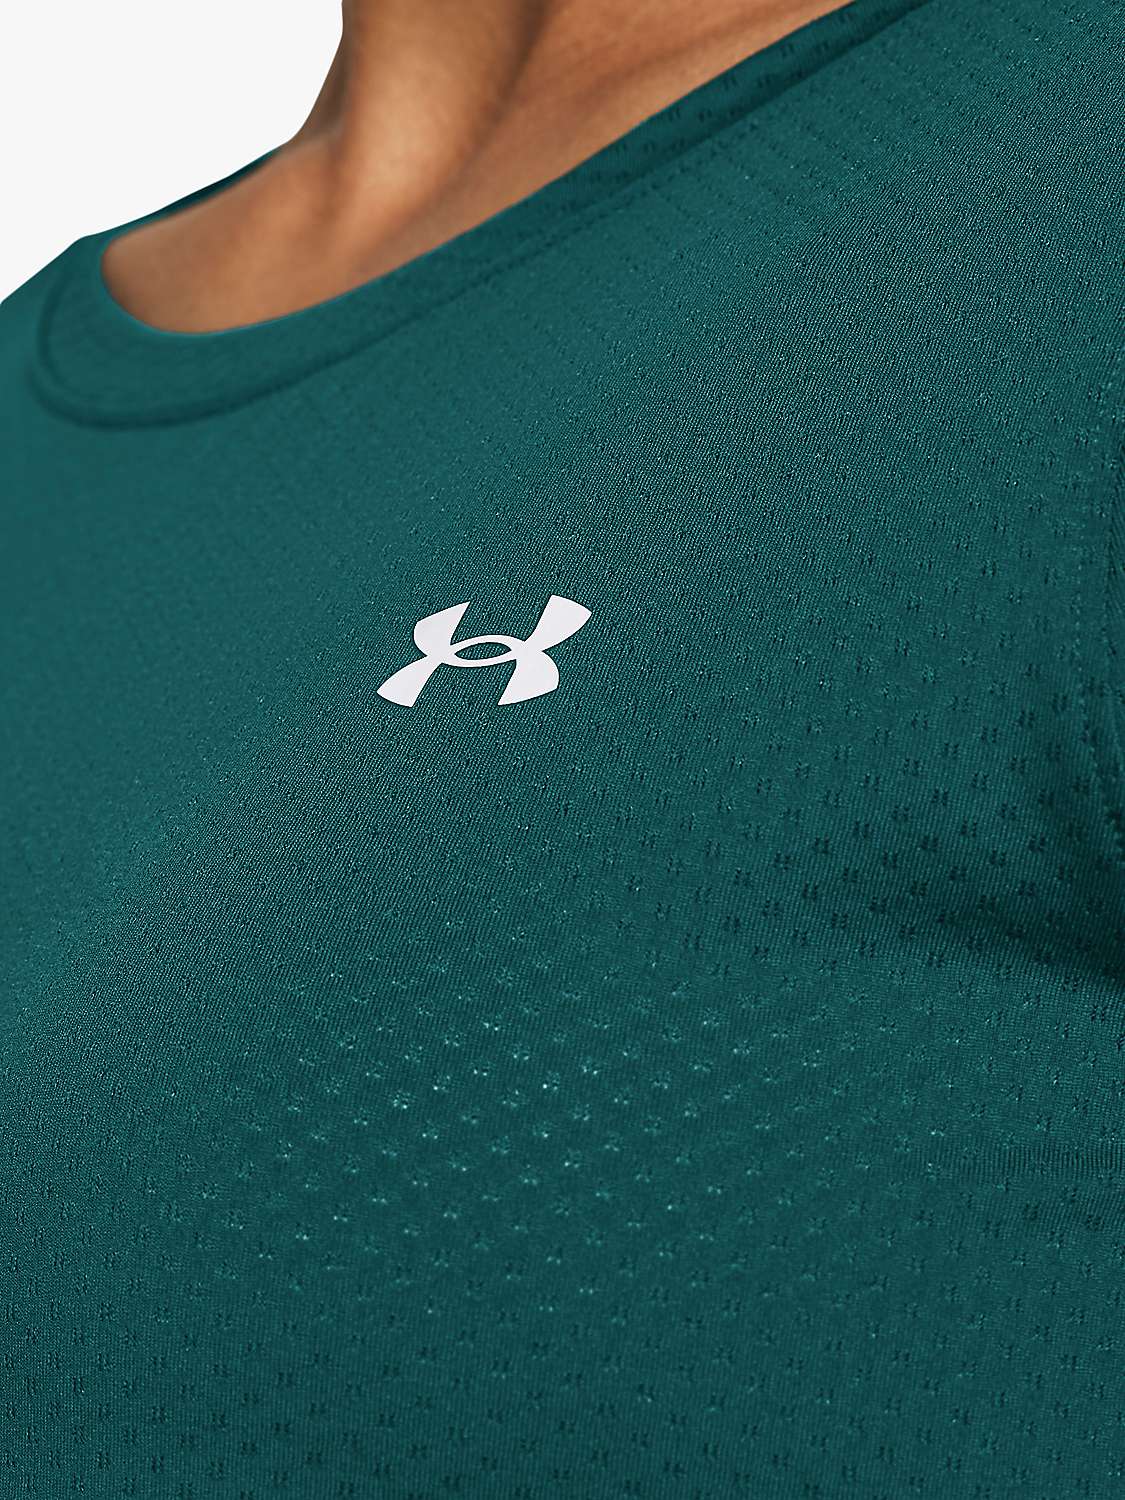 Buy Under Armour HeatGear Armour Short Sleeve Gym Top, Hydro Teal/White Online at johnlewis.com